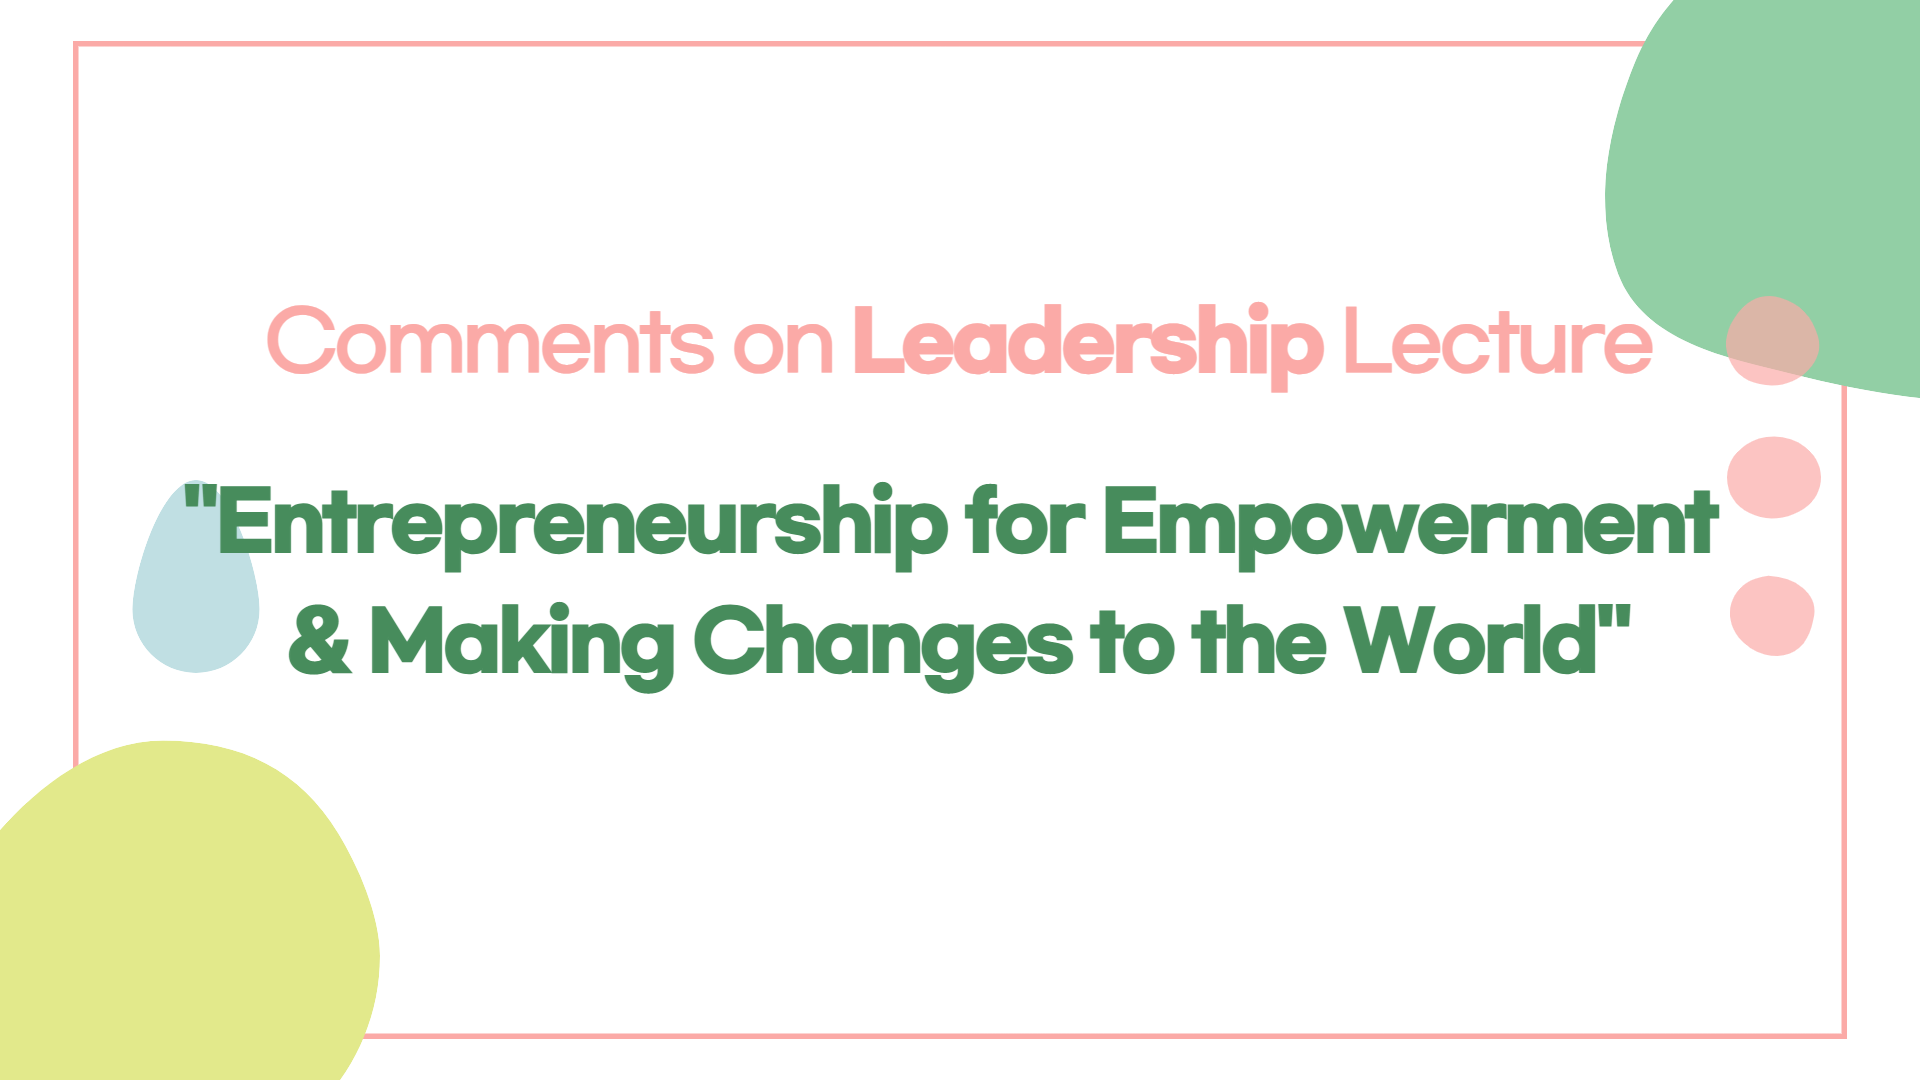 Comments on Entrepreneurship for Empowerment and Making Changes to the World